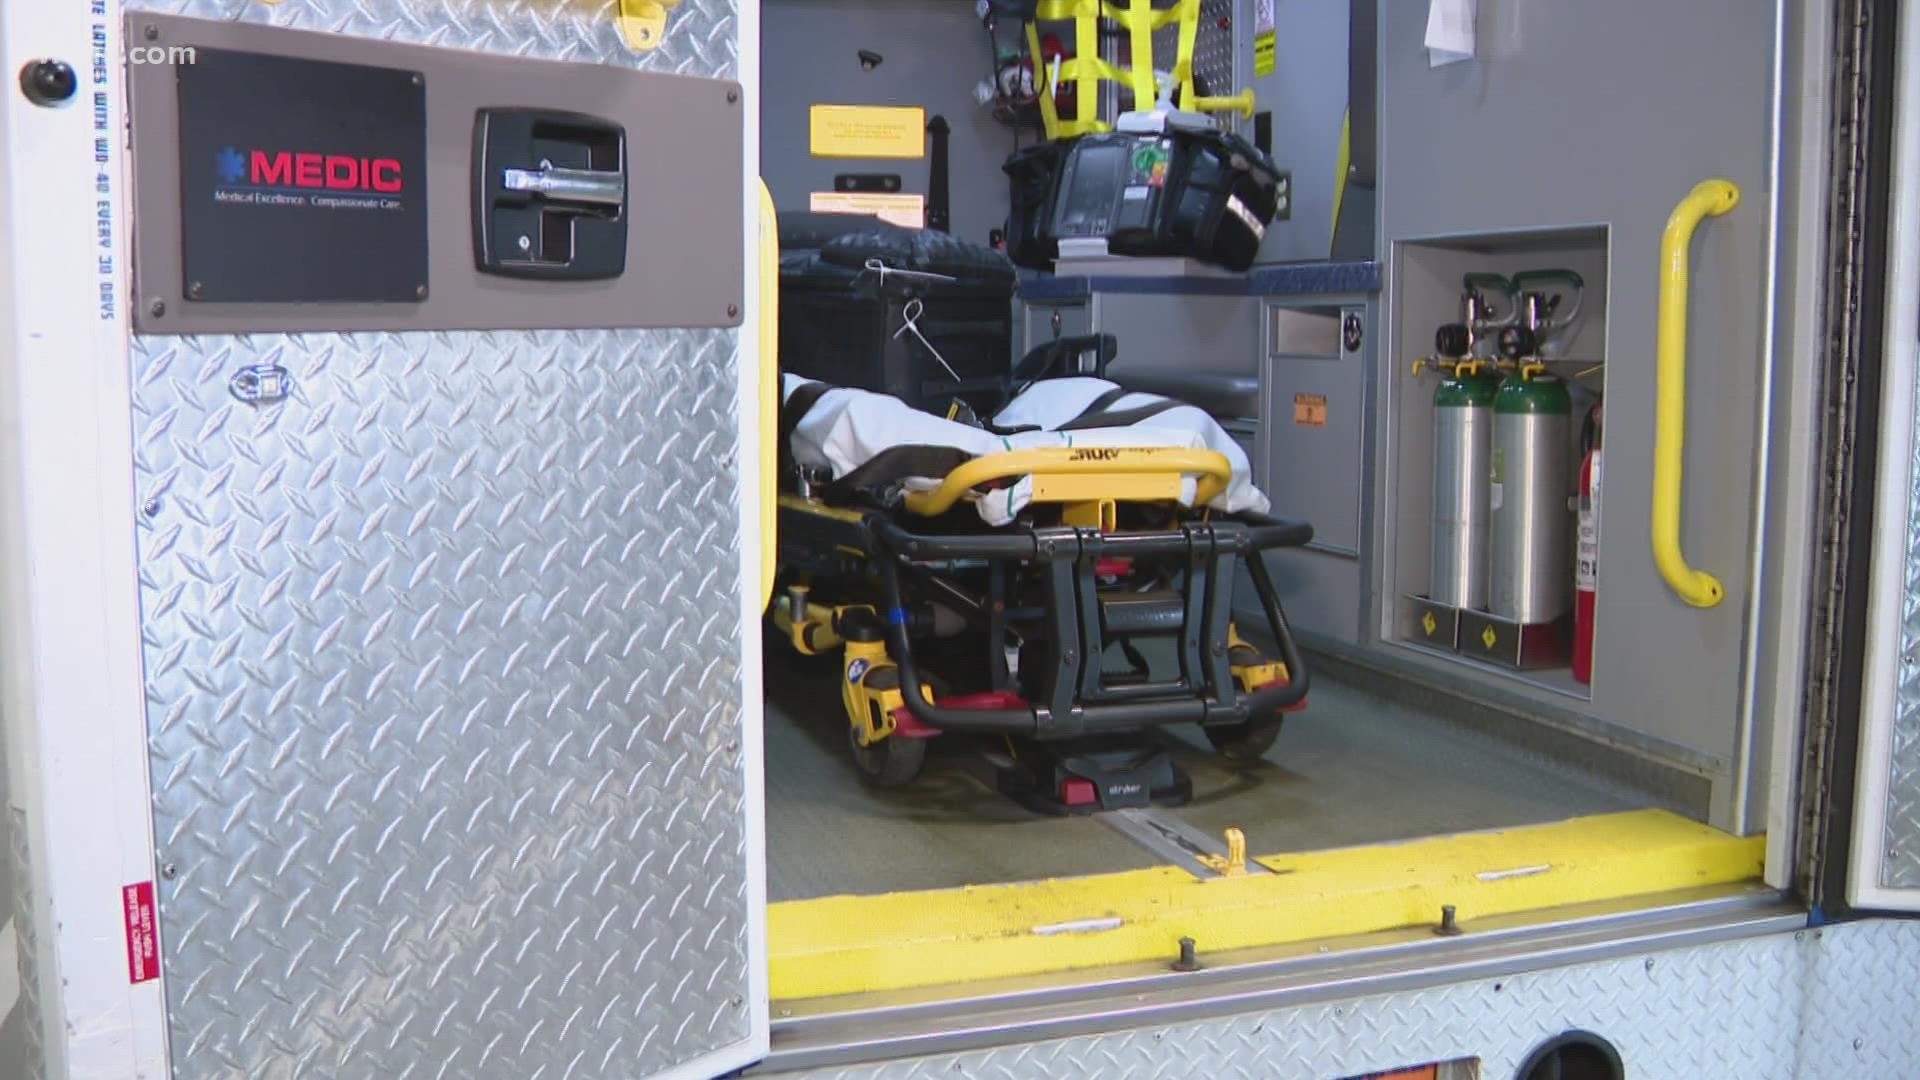 Mecklenburg EMS is stretched thin and has recently enforced mandatory overtime due to short-staffing.